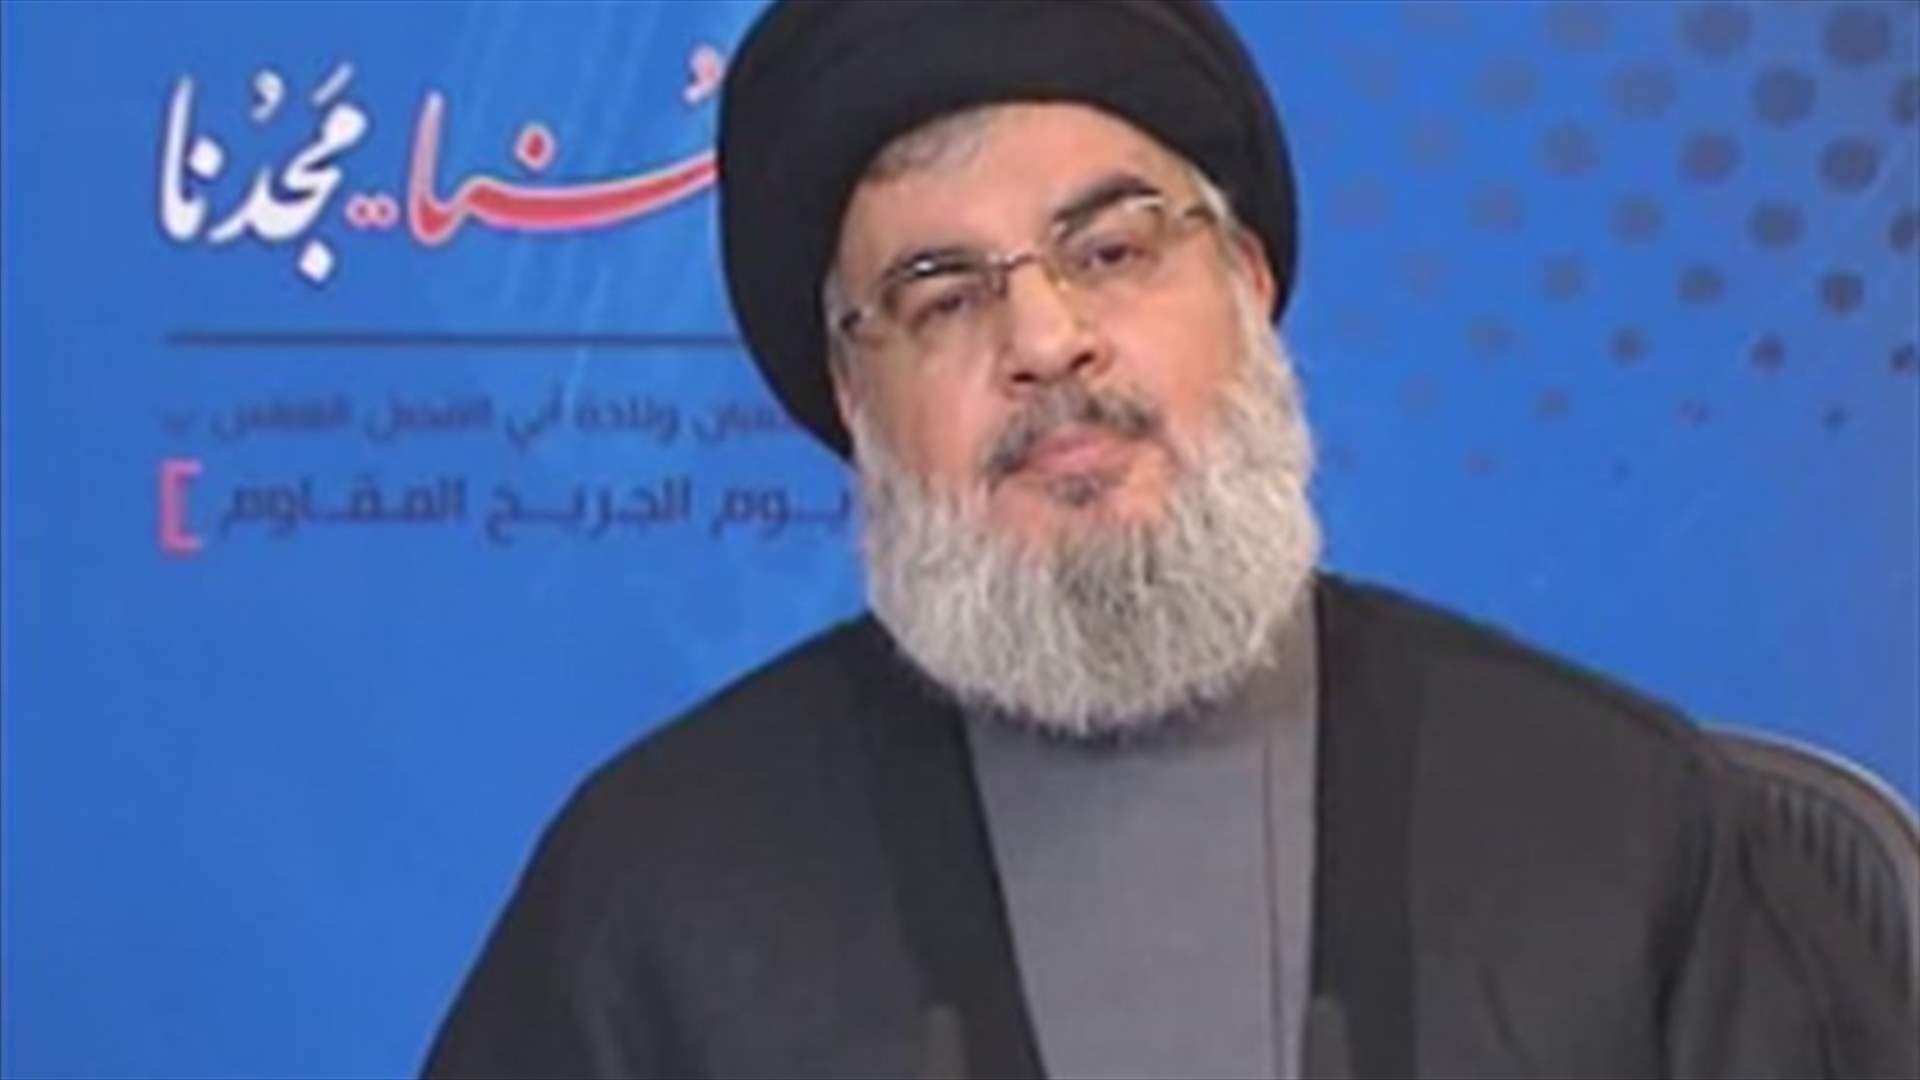 Sacrifices of army and resistance contributed to success of municipal elections – Sayyed Nasrallah